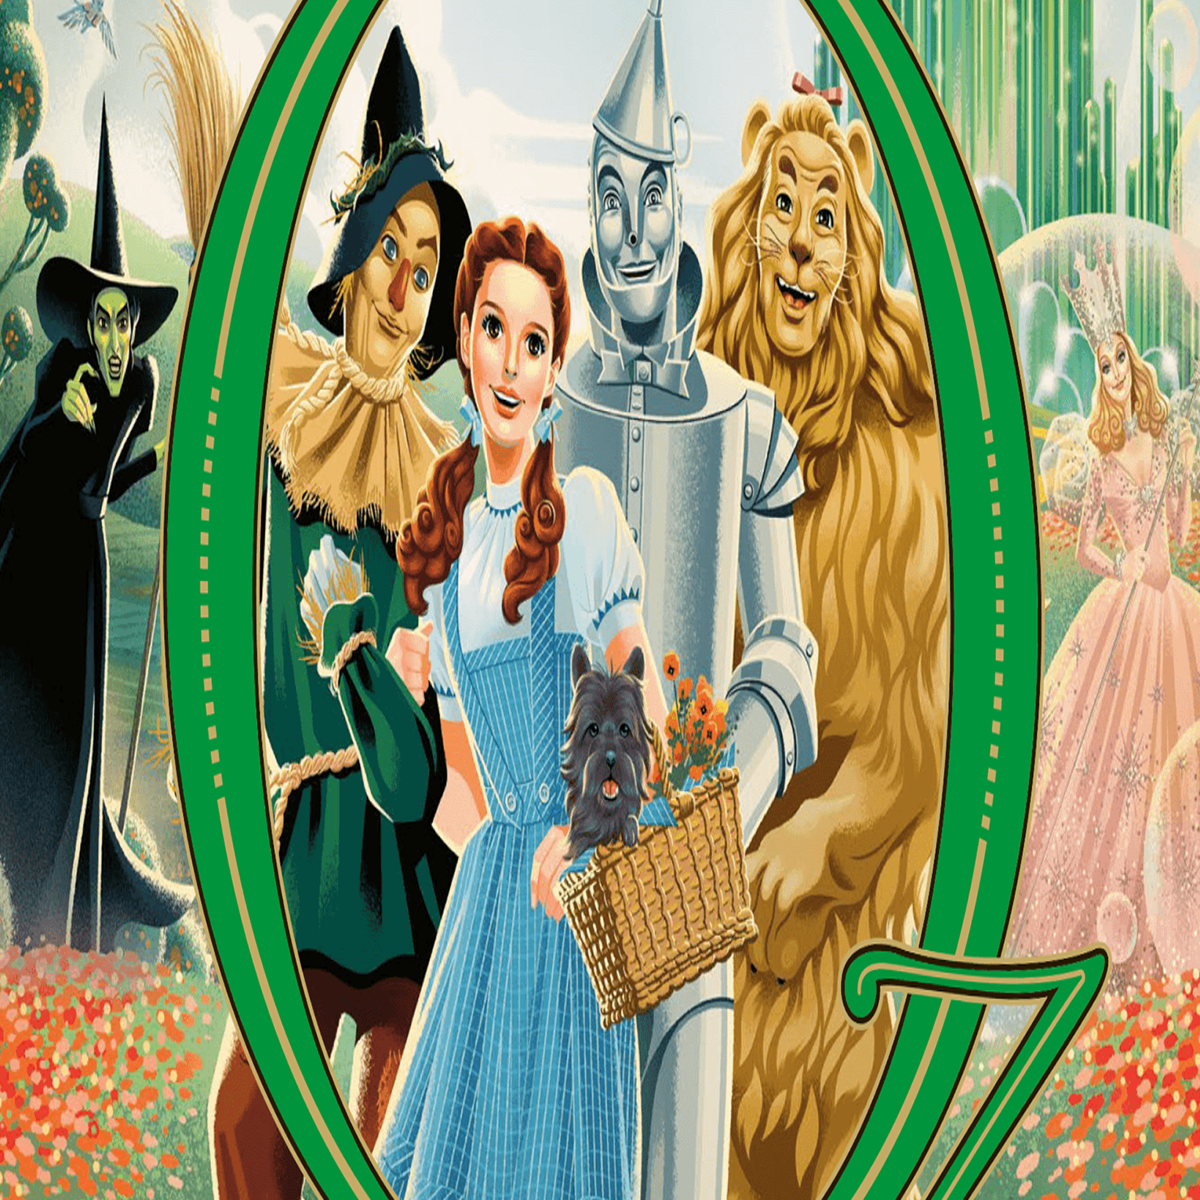 The Wizard of OZ board game will challenge your courage, brains